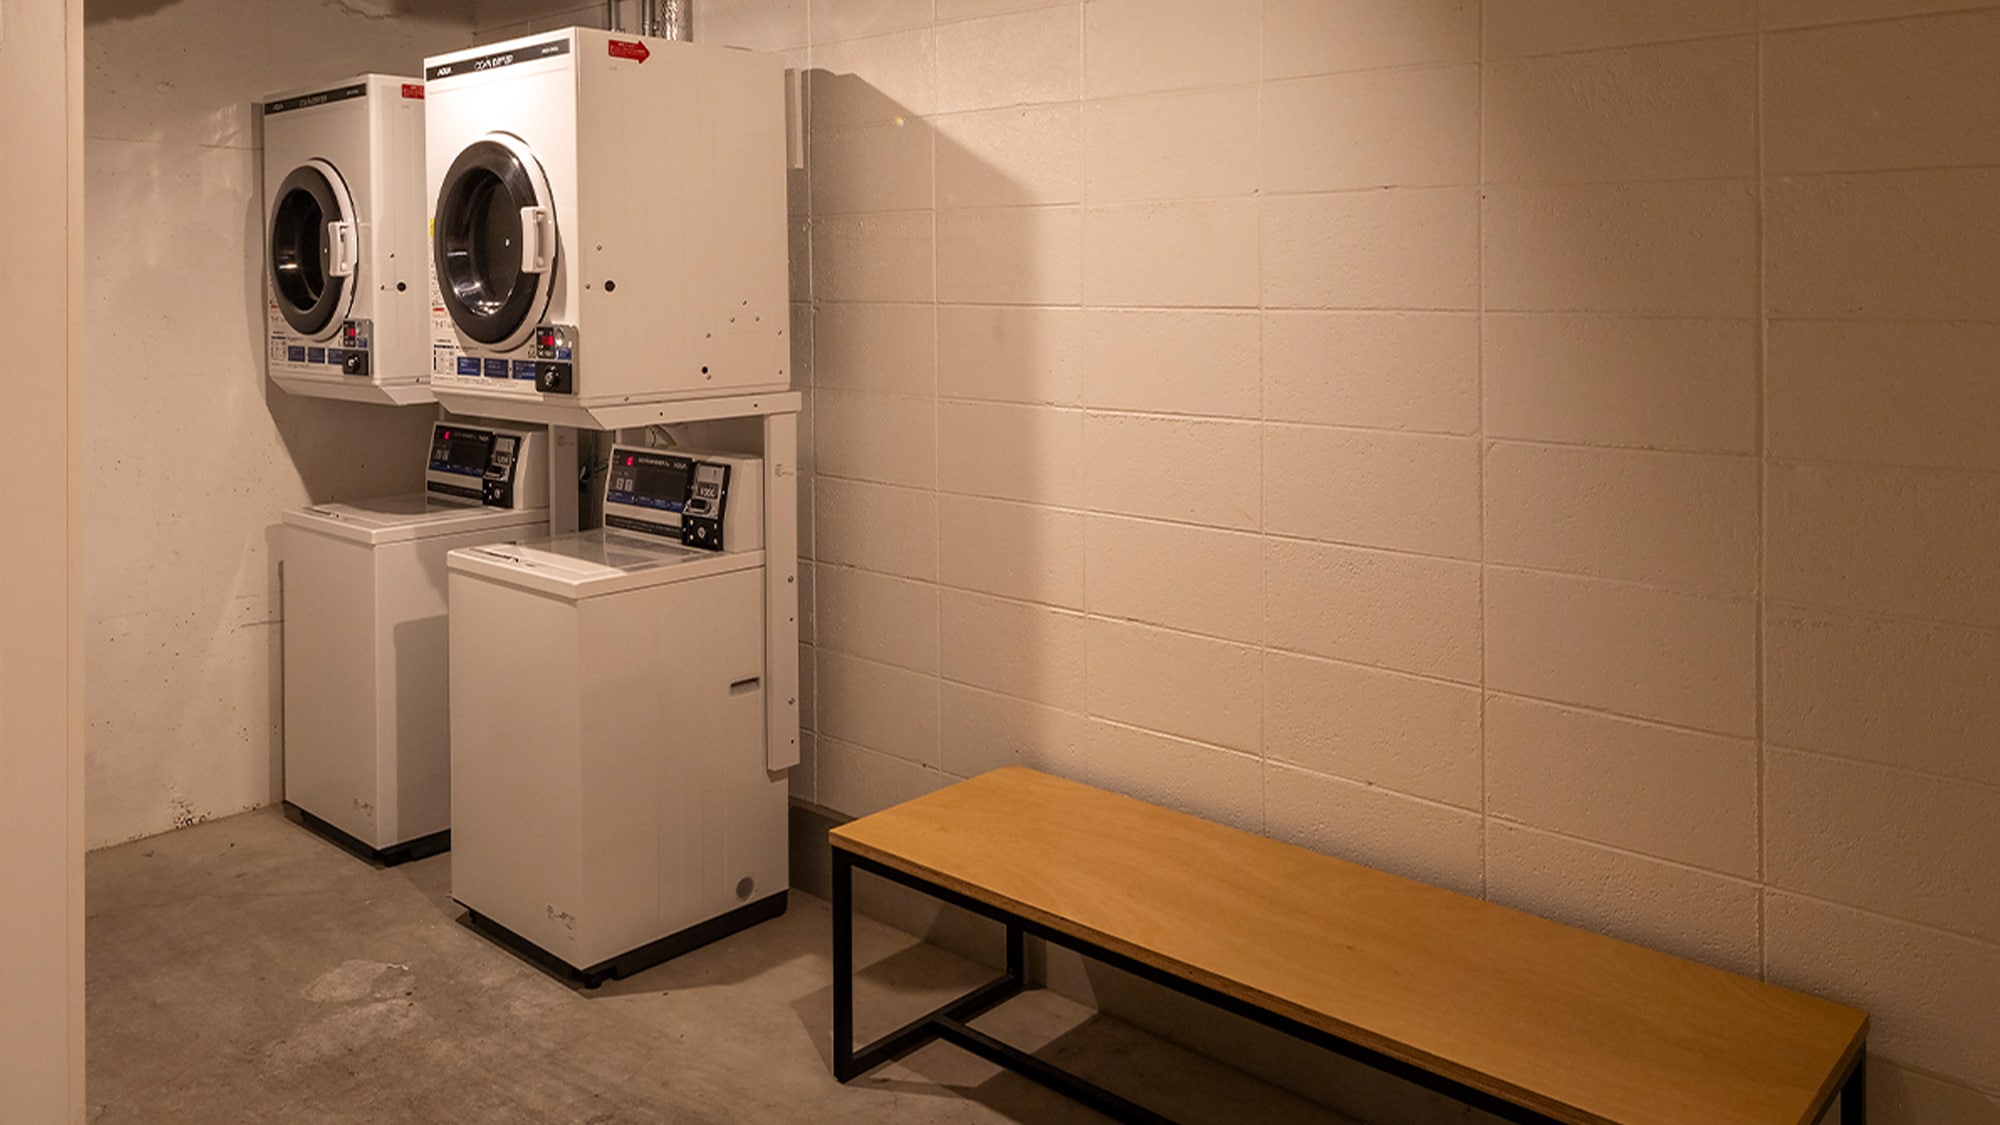 There is also a coin laundry exclusively for guests. Great for long trips or consecutive nights [Coin laundry/24H]